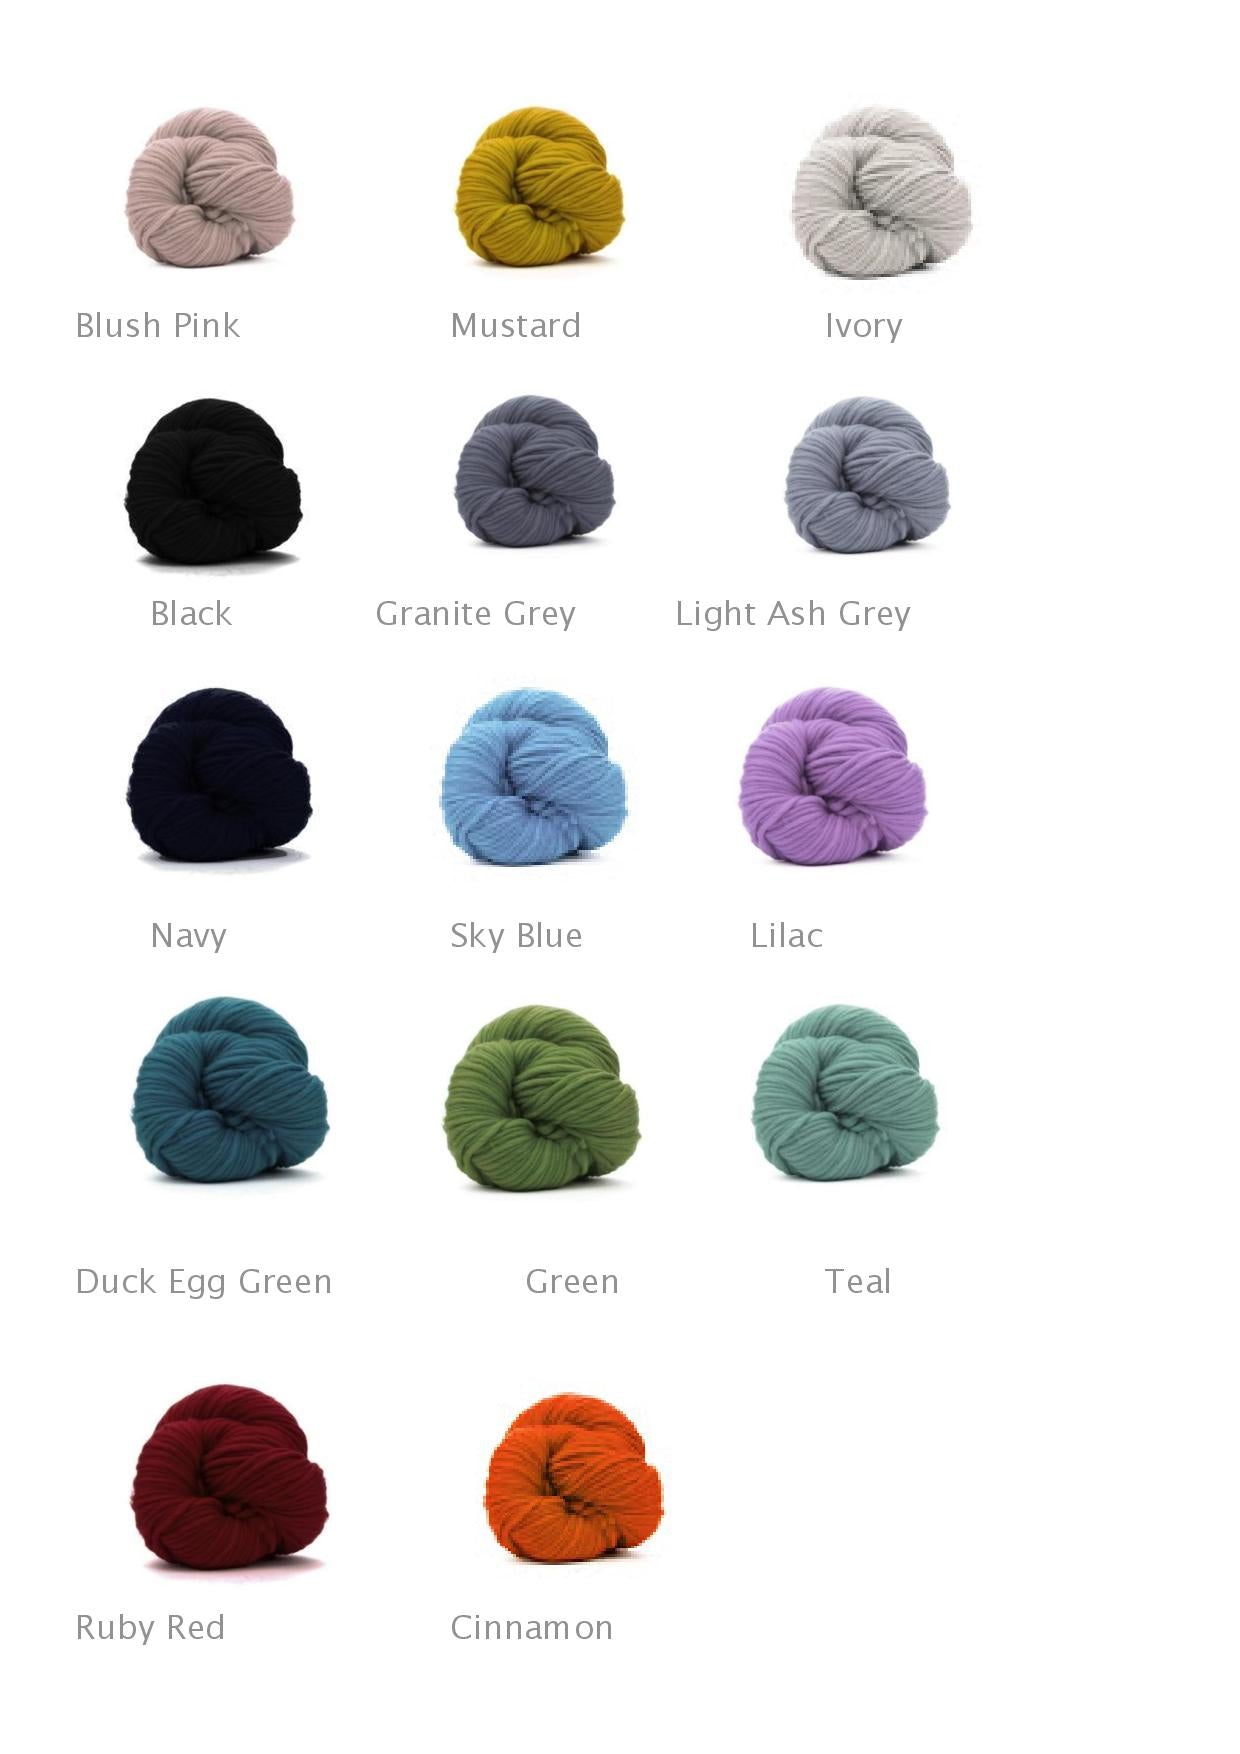 Wool Merino yarn several colors super wash easy care 8 sale price free  shipping offer